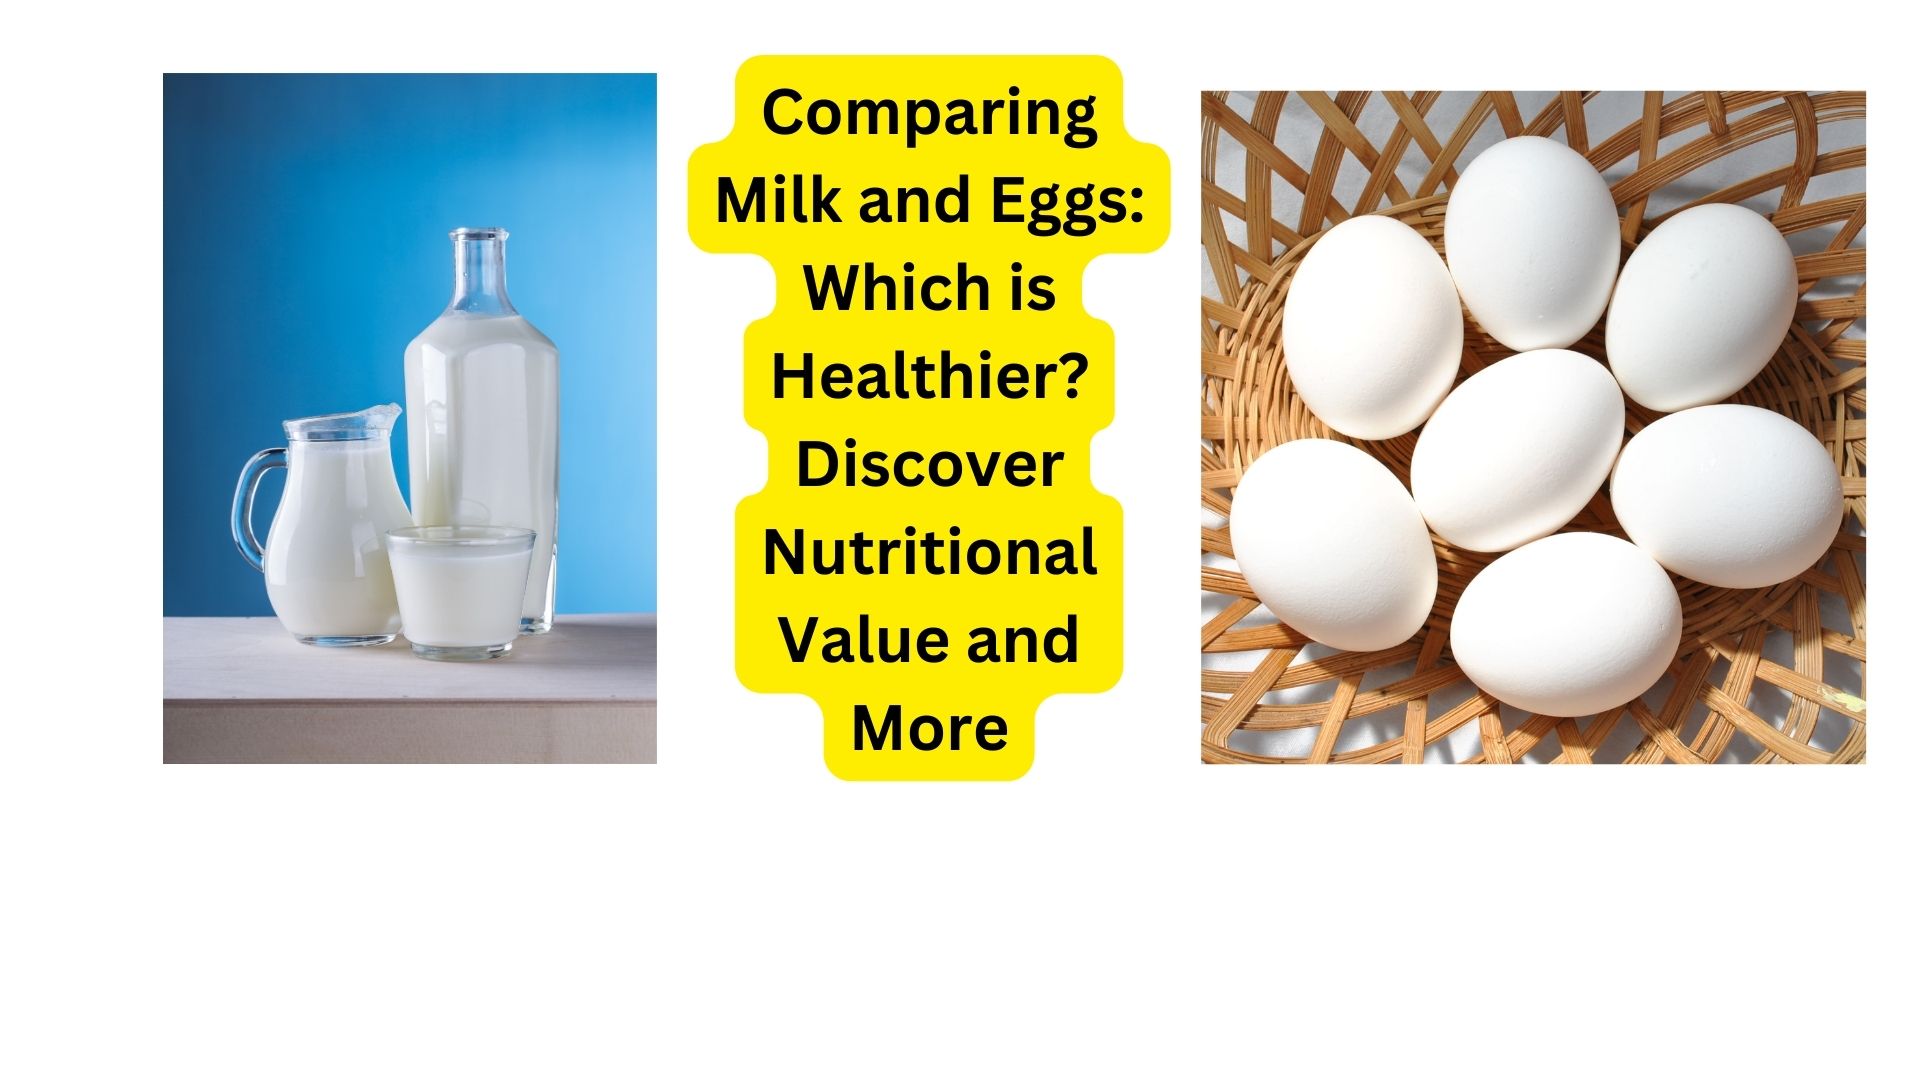 Comparing Milk and Eggs: Which is Healthier? Discover Nutritional Value and More